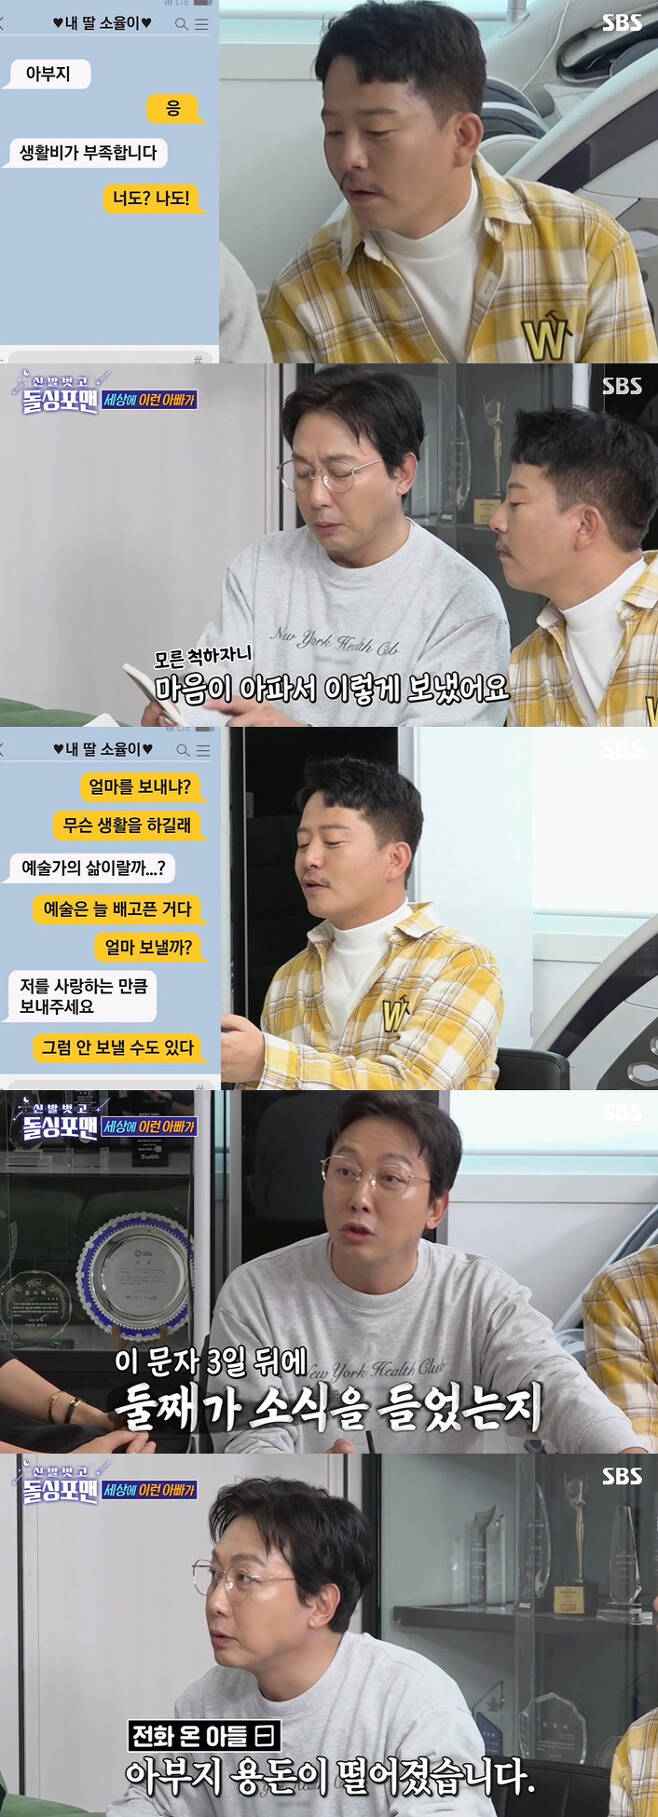 Dollsing4men Tak Jae-hun revealed a delightful anecdote with his daughter studying in the United States.On the 19th SBS Take off your shoes and dolsing foreman, Royal Family Kim Ji-young, Jung Sang-hoon and Yoo Seon appeared as guests.Tak Jae-hun said, I recently received an SMS saying that my daughter has lost allowance. In fact, I just gave allowance.Tak Jae-hun said, I refused to say, I do not have enough money for my fathers life. Tak Jae-hun said, I also appealed.We should stop sending SMS messages because we knew each others situation.He said, But when I pretended not to know, I was heartbroken and said, How long are you going to spend? What kind of life do you have? My daughter said, Its like an artists life. So I replied, Art is always hungry.Later, when I asked him how much he wanted to spend, he said, Please send me as much as you love me.Tak Jae-hun said, Three days after my daughters SMS, the second person contacted me to hear the news. Obviously, the first one seems to have said, Please contact me.My son said, My fathers allowance has fallen.